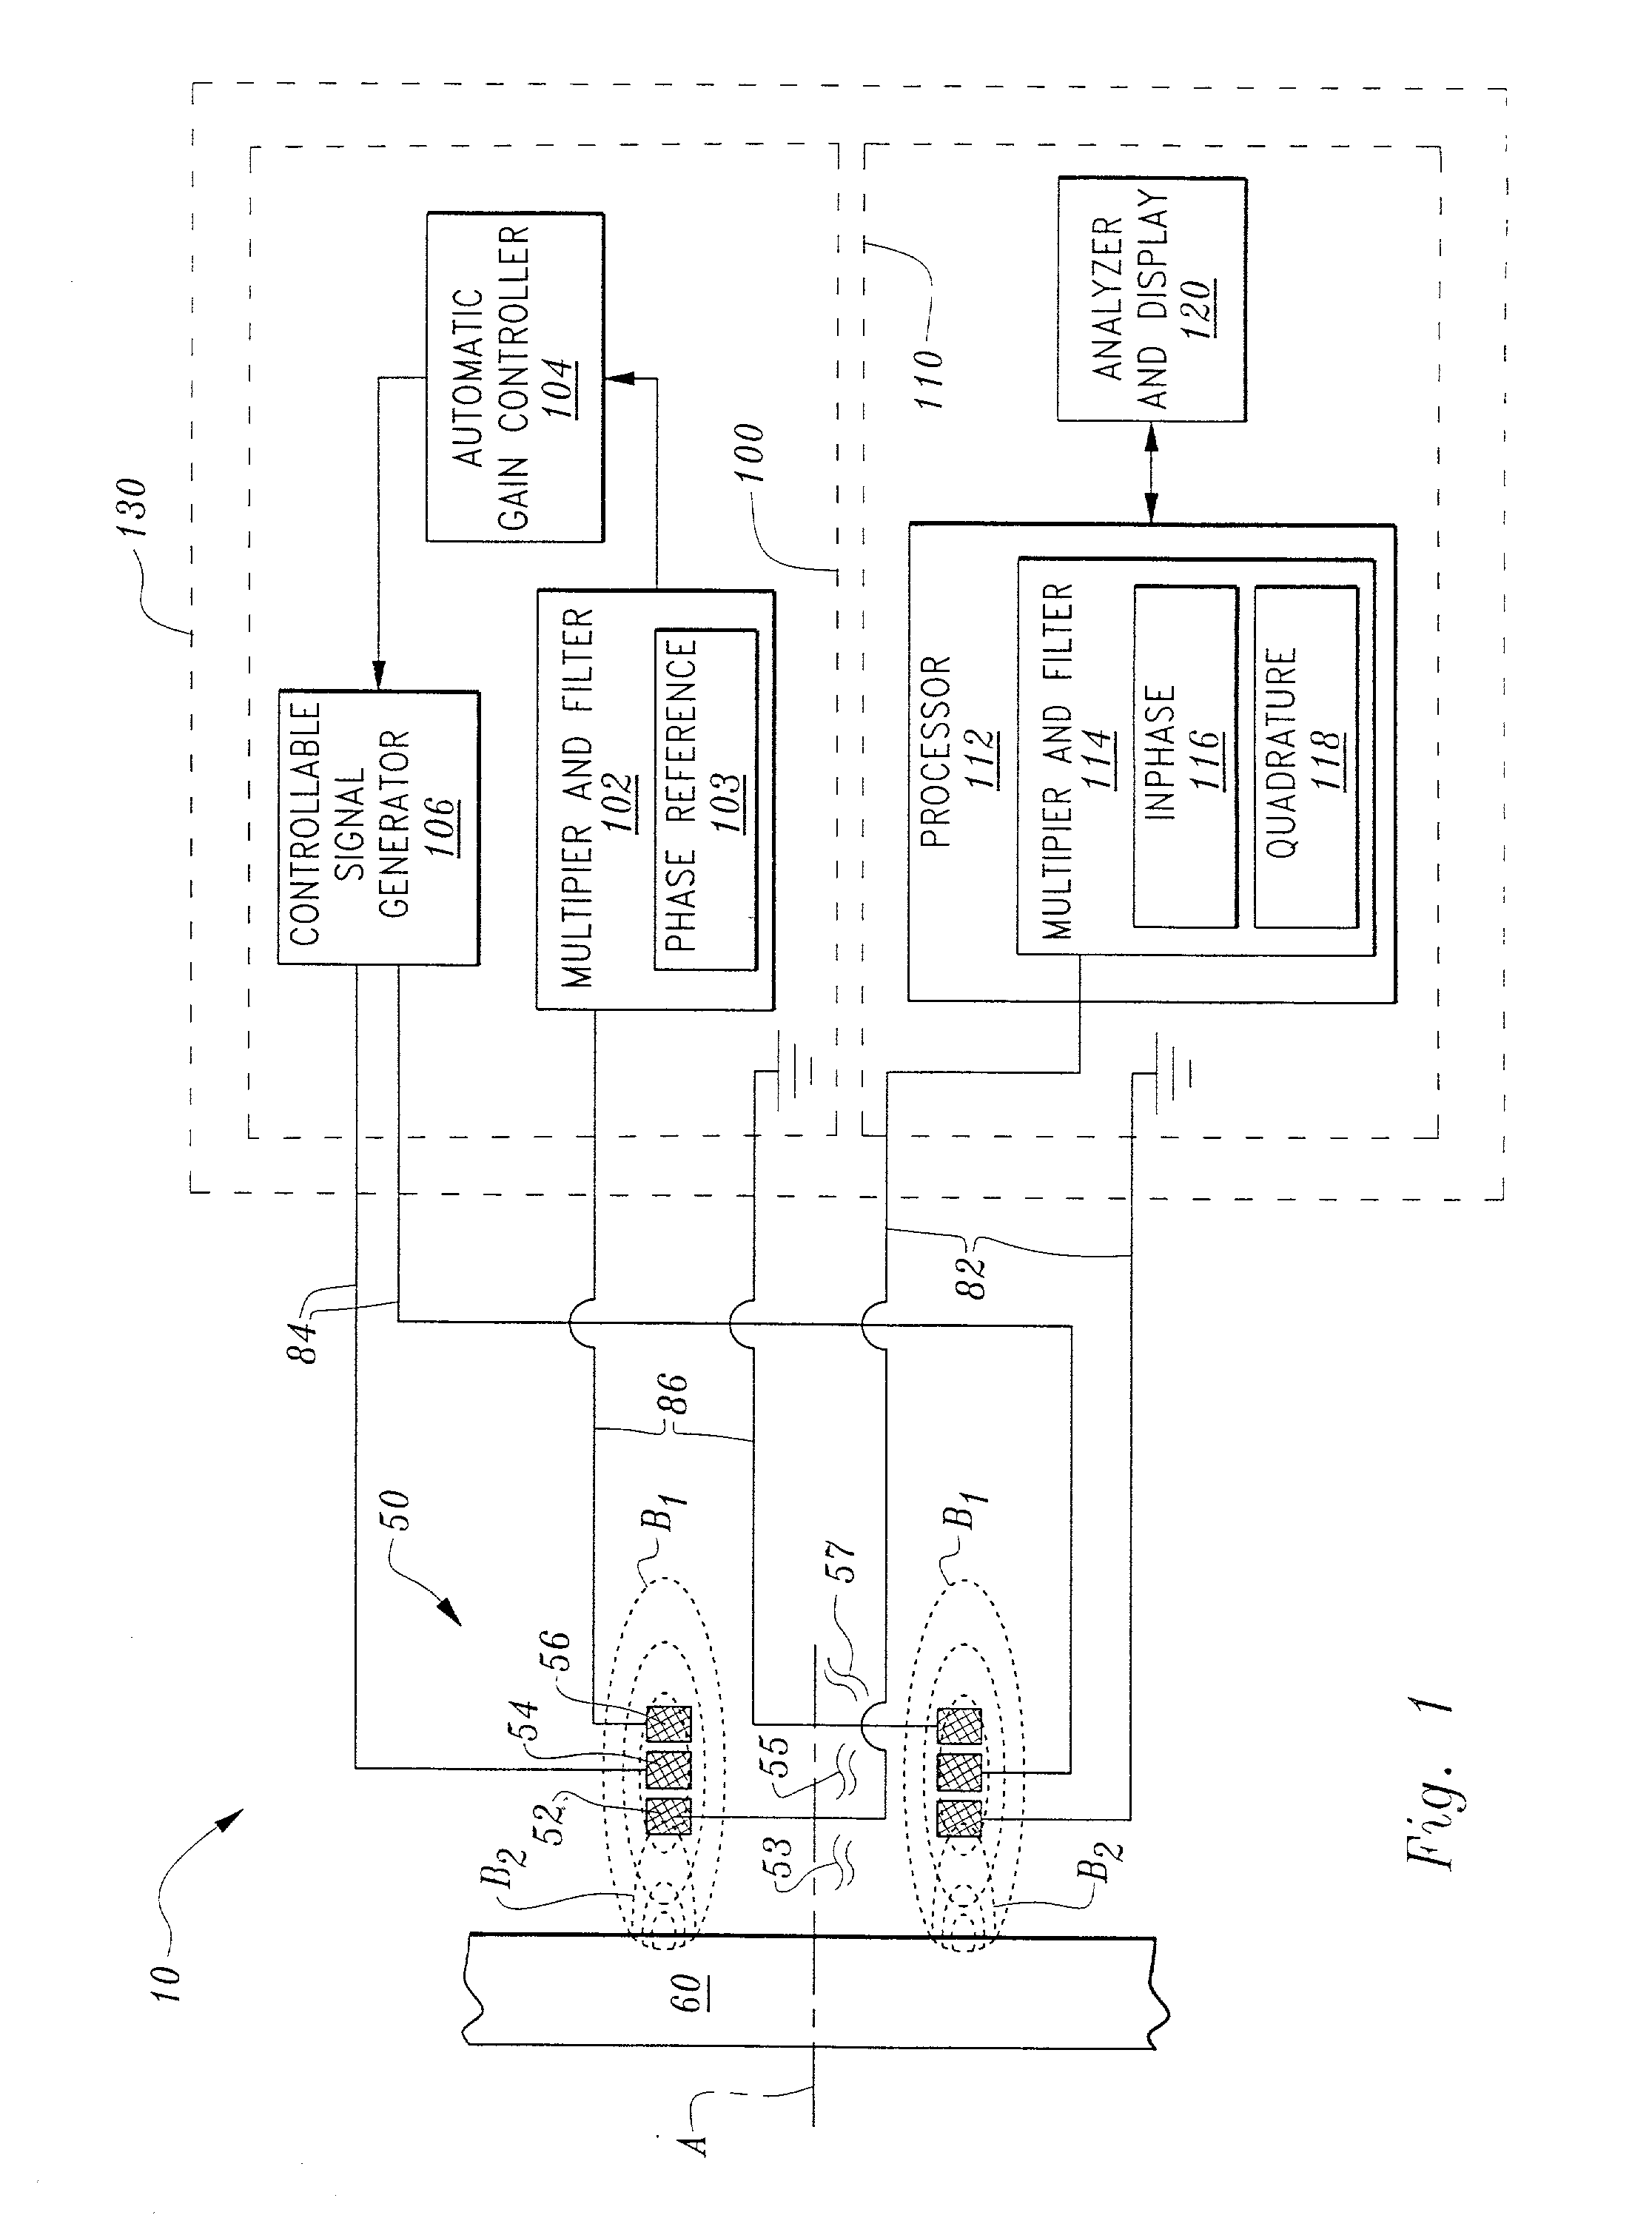 Multi-coil proximity probe system: apparatus and method